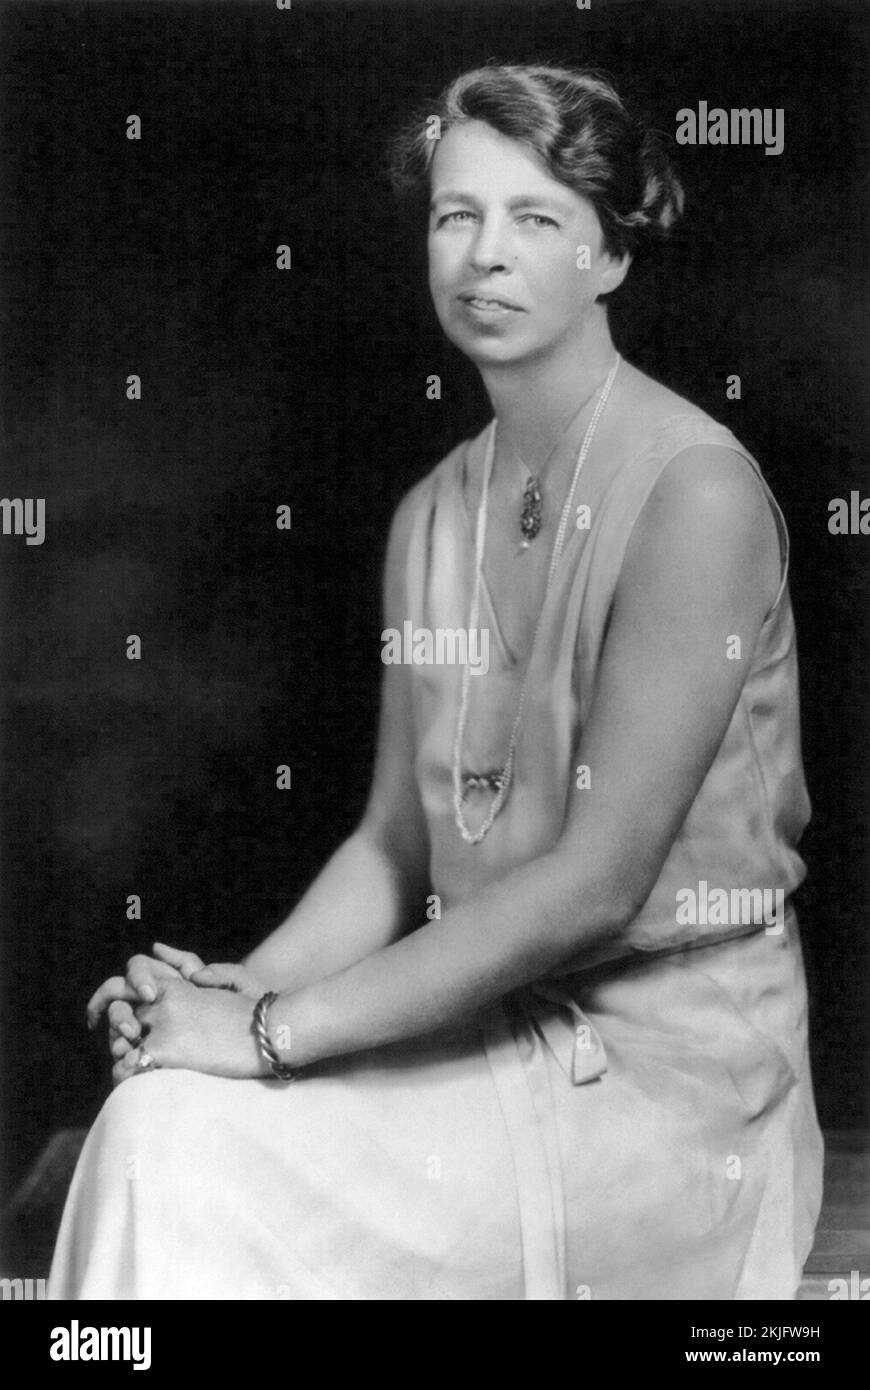 Eleanor Roosevelt. The photo is said to be from 1932 when shenwould have been 48 yrs old, but she looks younger than 48 yrs old so the date may be doubtful Stock Photo